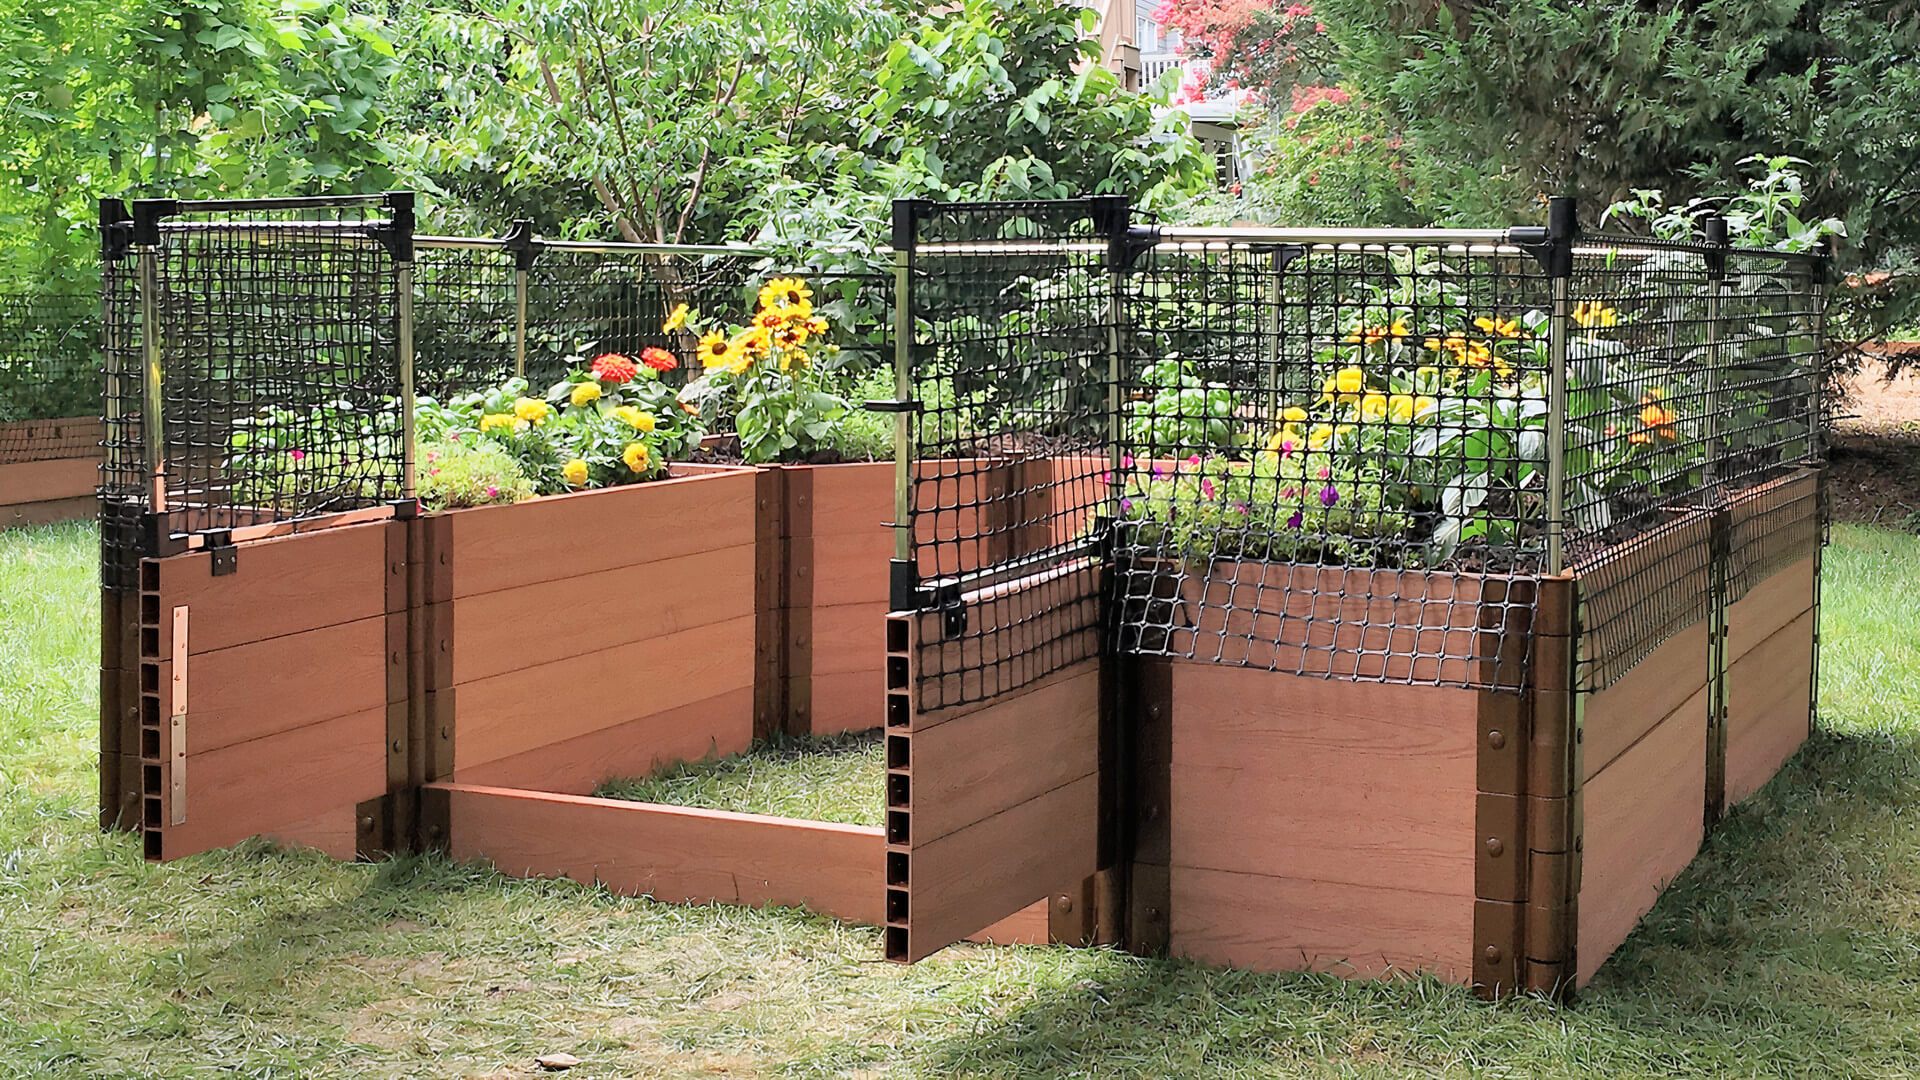 Frame It All 4-Foot x 8-Foot Raised Garden Bed